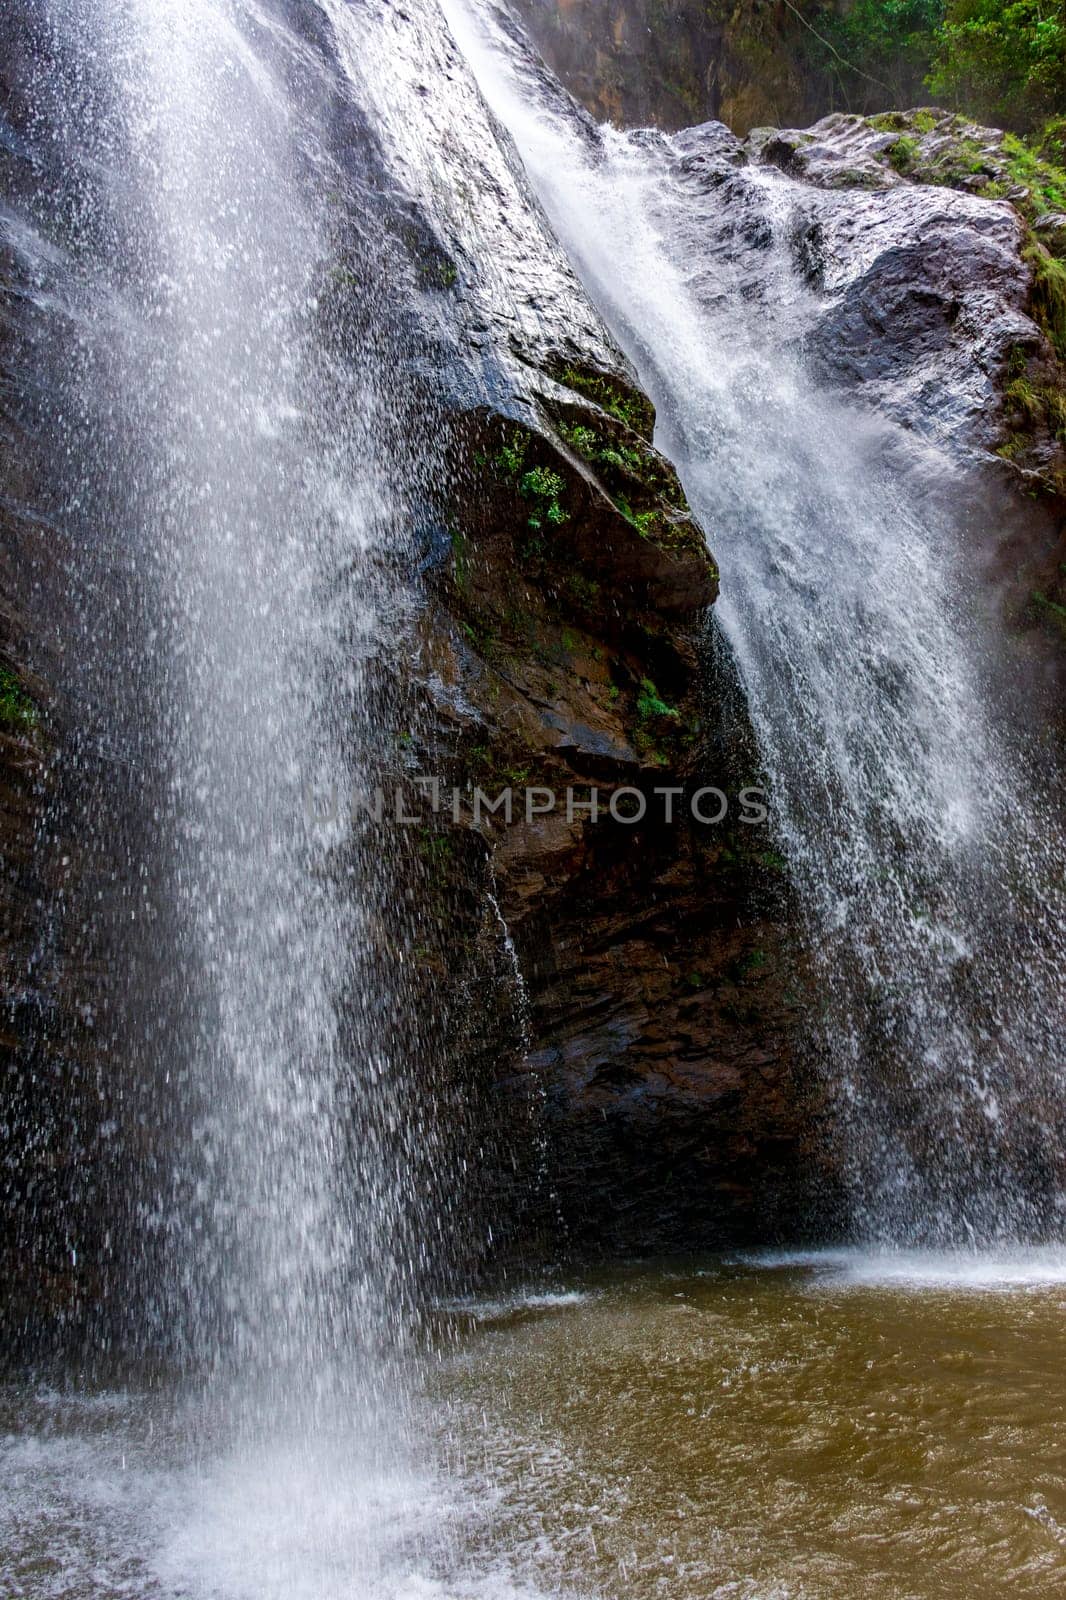 Water from the waterfall splashing through the rocks into a water well in Minas Gerais, Brazil